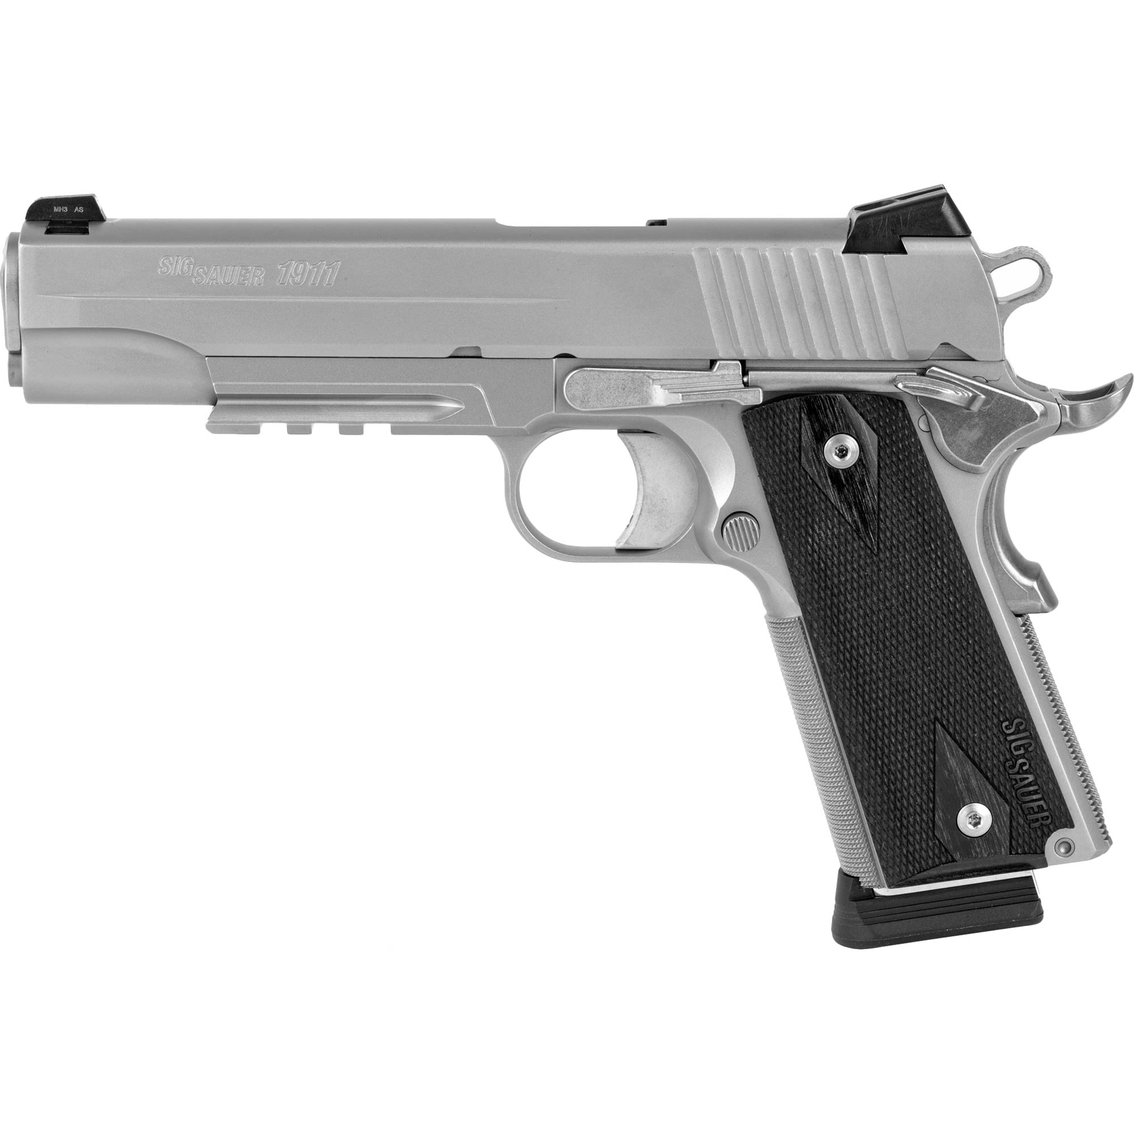 Sig Sauer 1911 45 ACP 5 in. Barrel 8 Rds 2-Mags NS Pistol SS with Wood Grips - Image 2 of 3